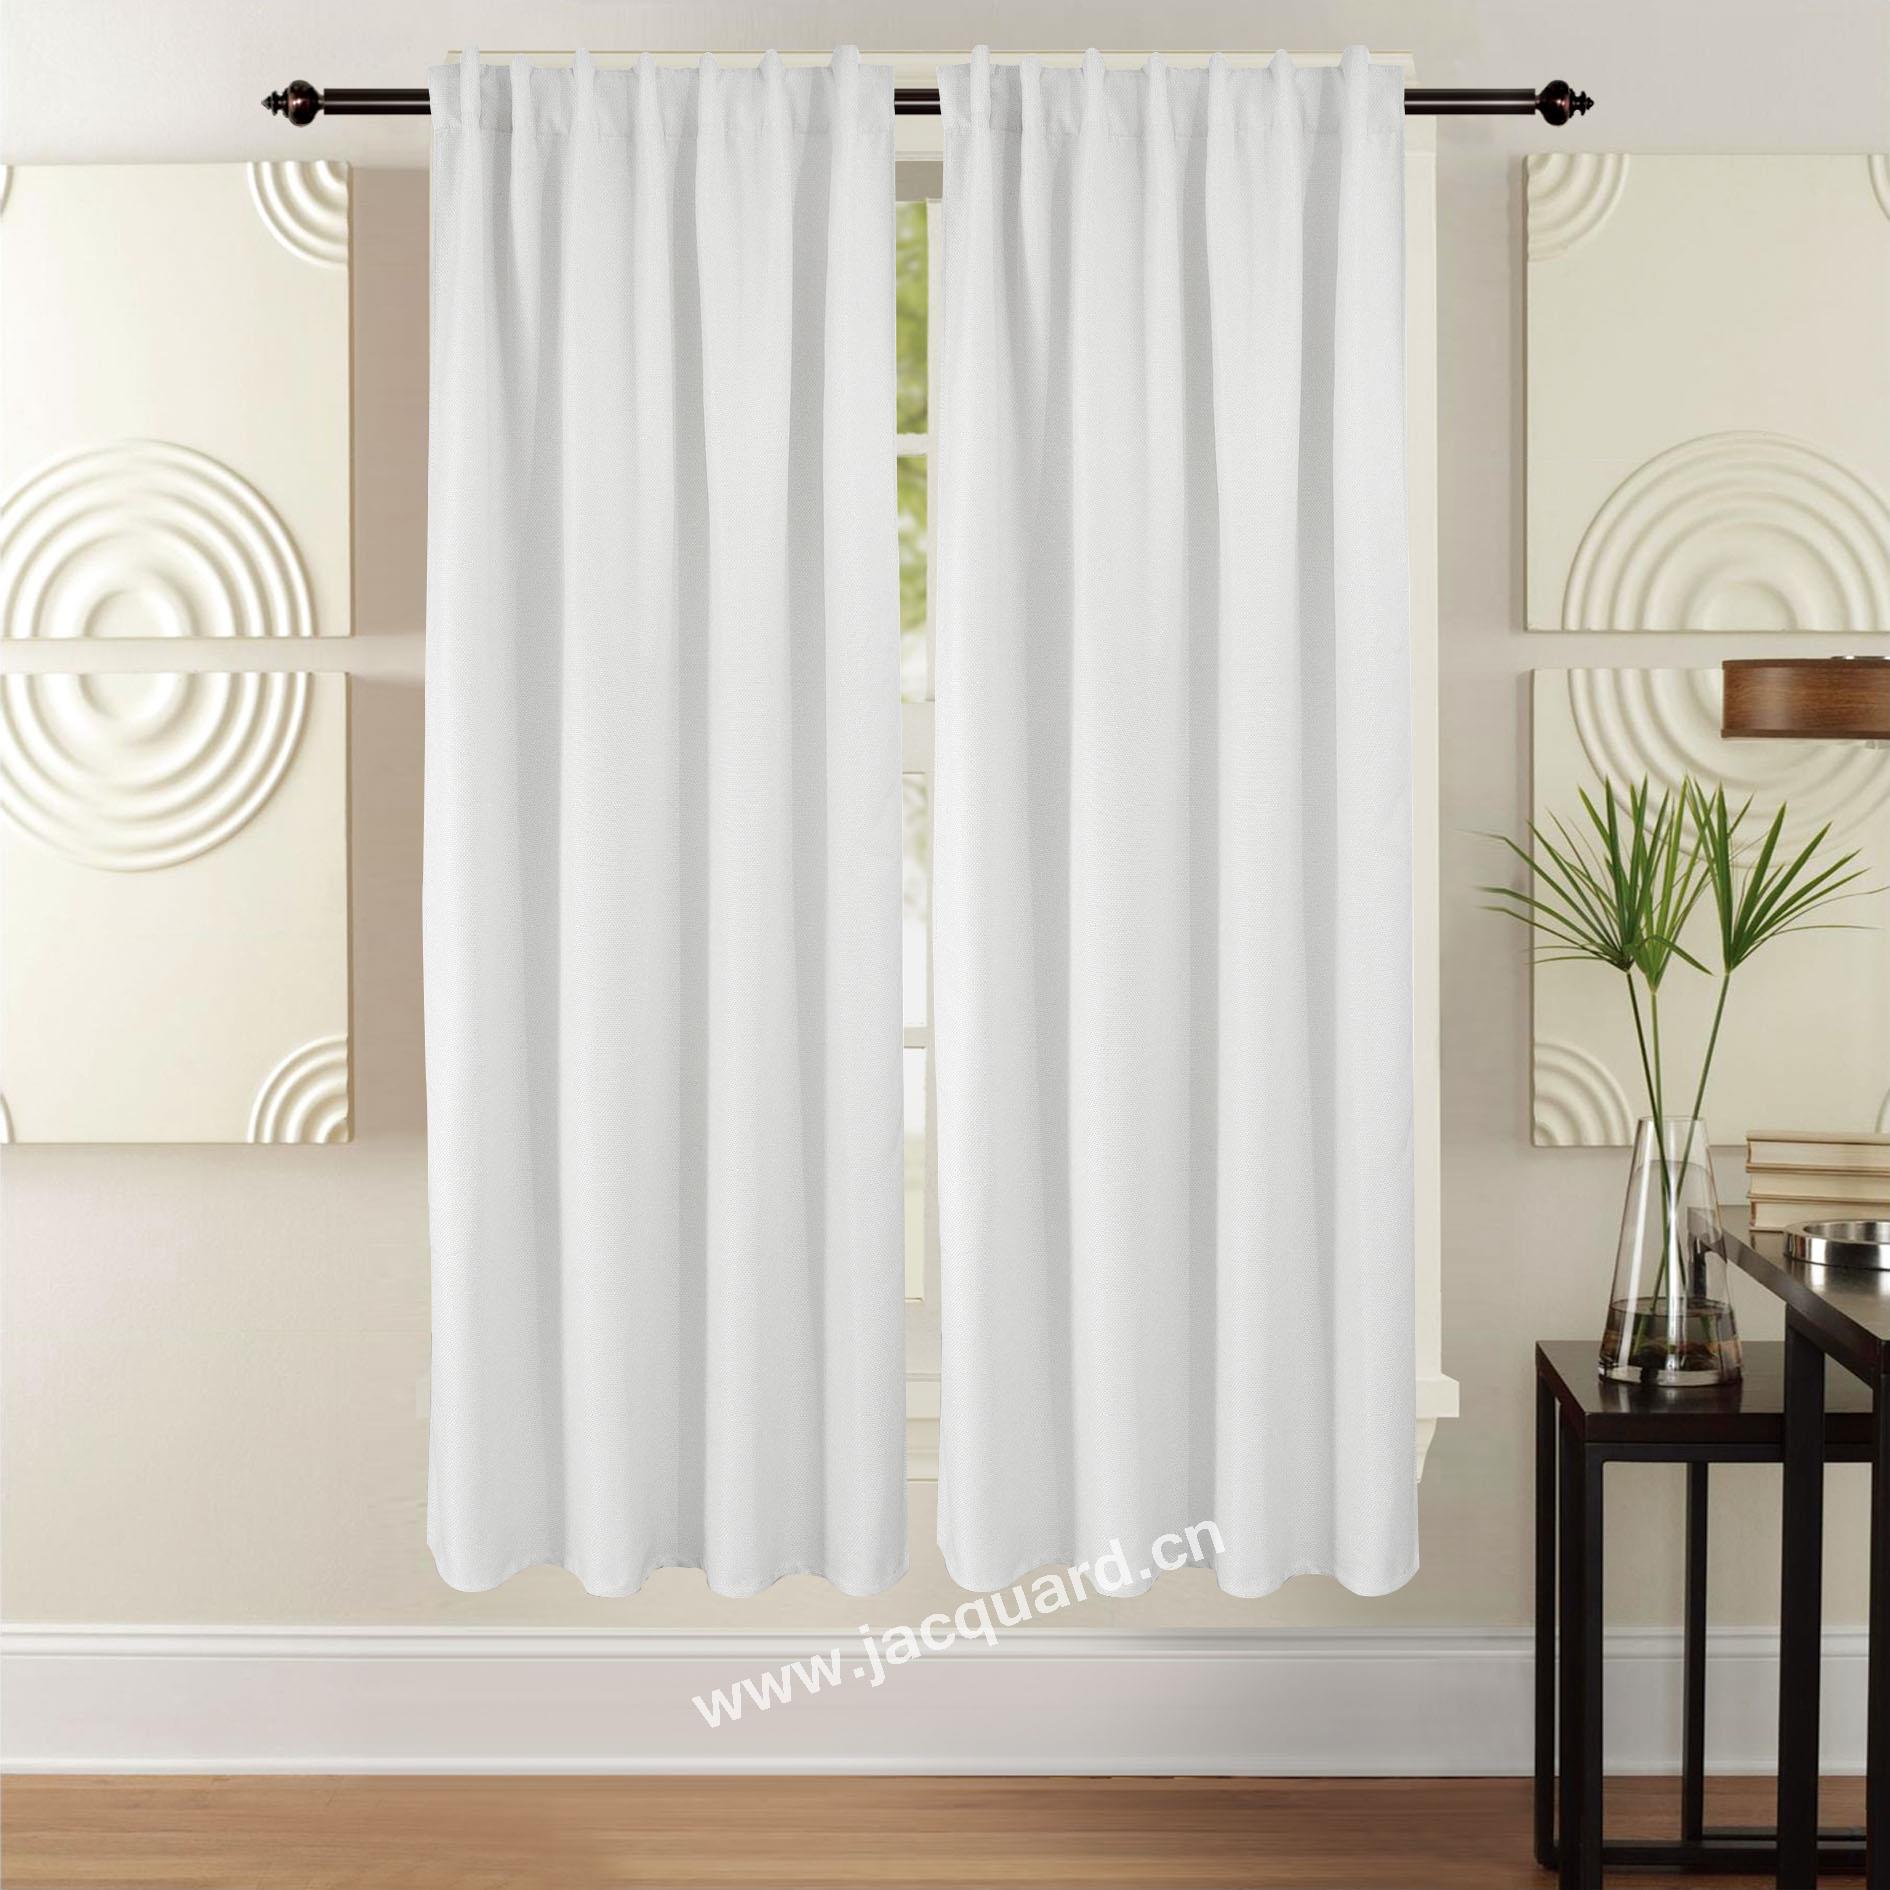 Bedroom Curtains Living Room CurtainLiving Room Curtain Minimalist Jacquard Gromment Curtain/Eyelet  Curtain   for Bed Room Living Room